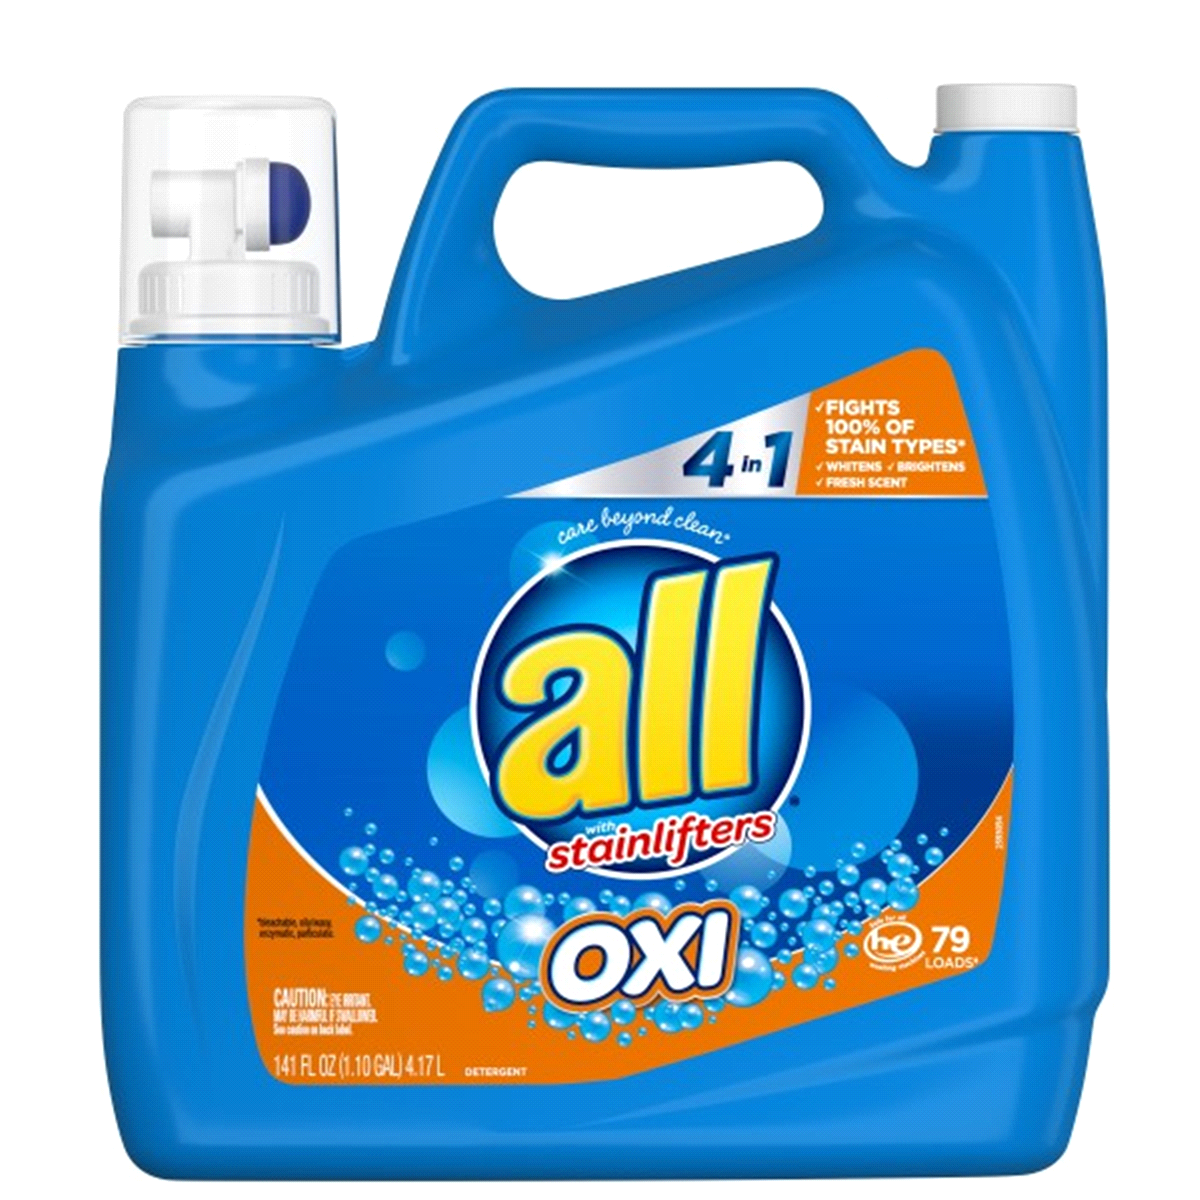 slide 1 of 1, All Stainlifter OXI Liquid Detergent, 141 oz